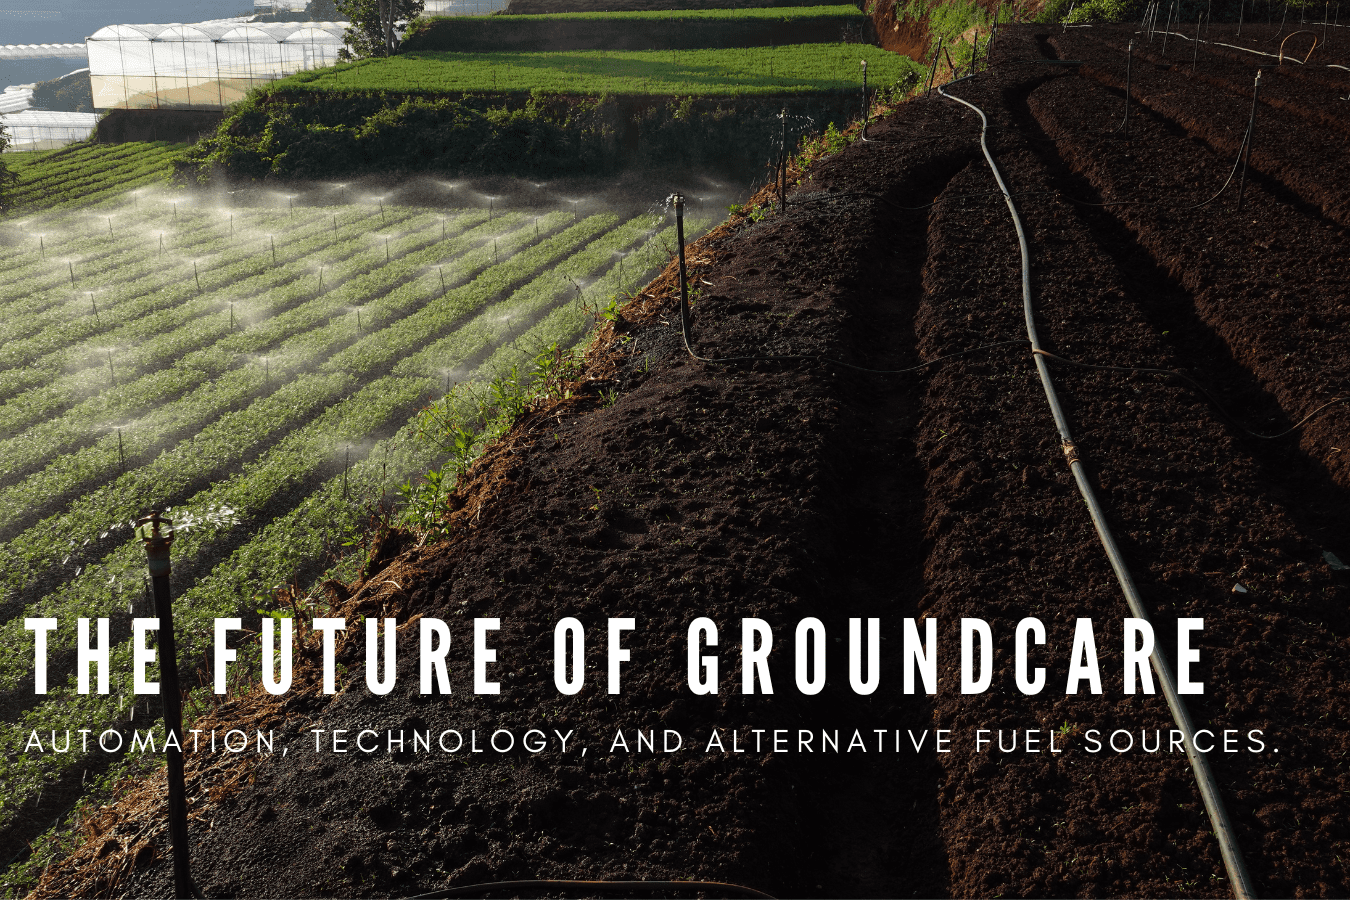 The future of ground care: Automation, technology, and alternative fuel sources.